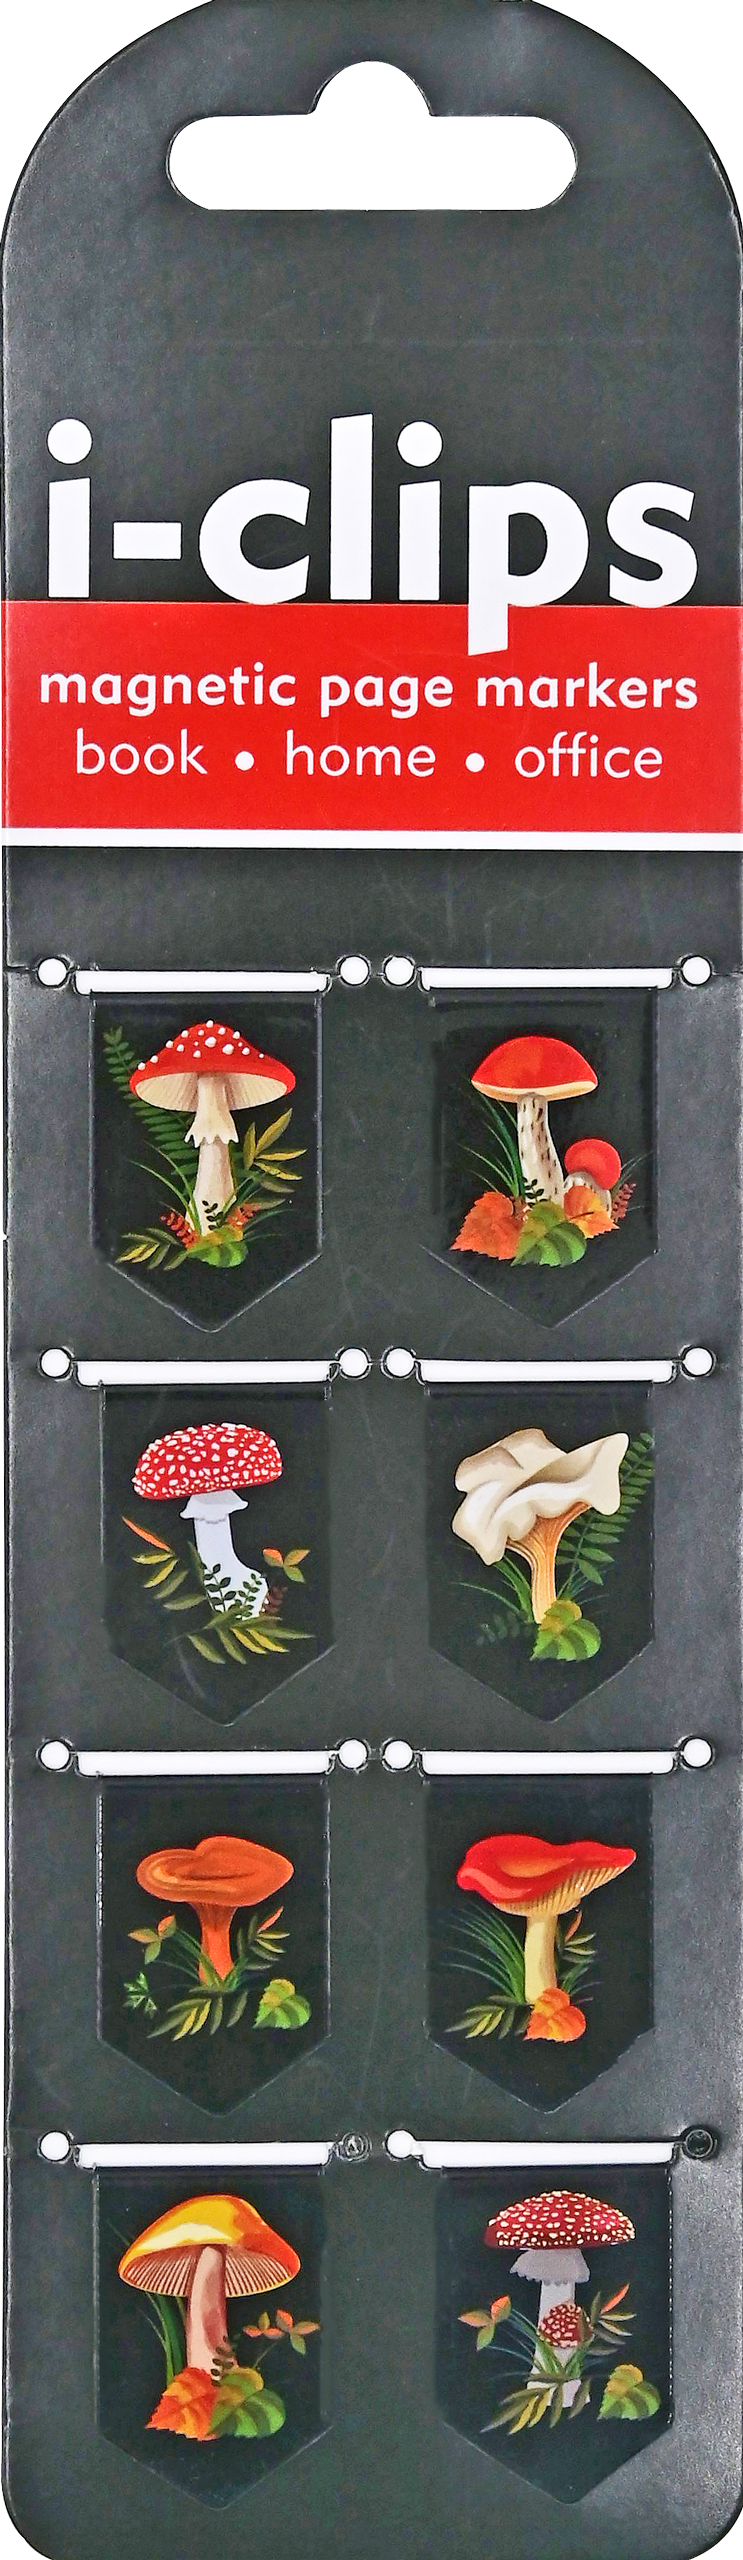 Mushrooms i-clips Magnetic Page Markers